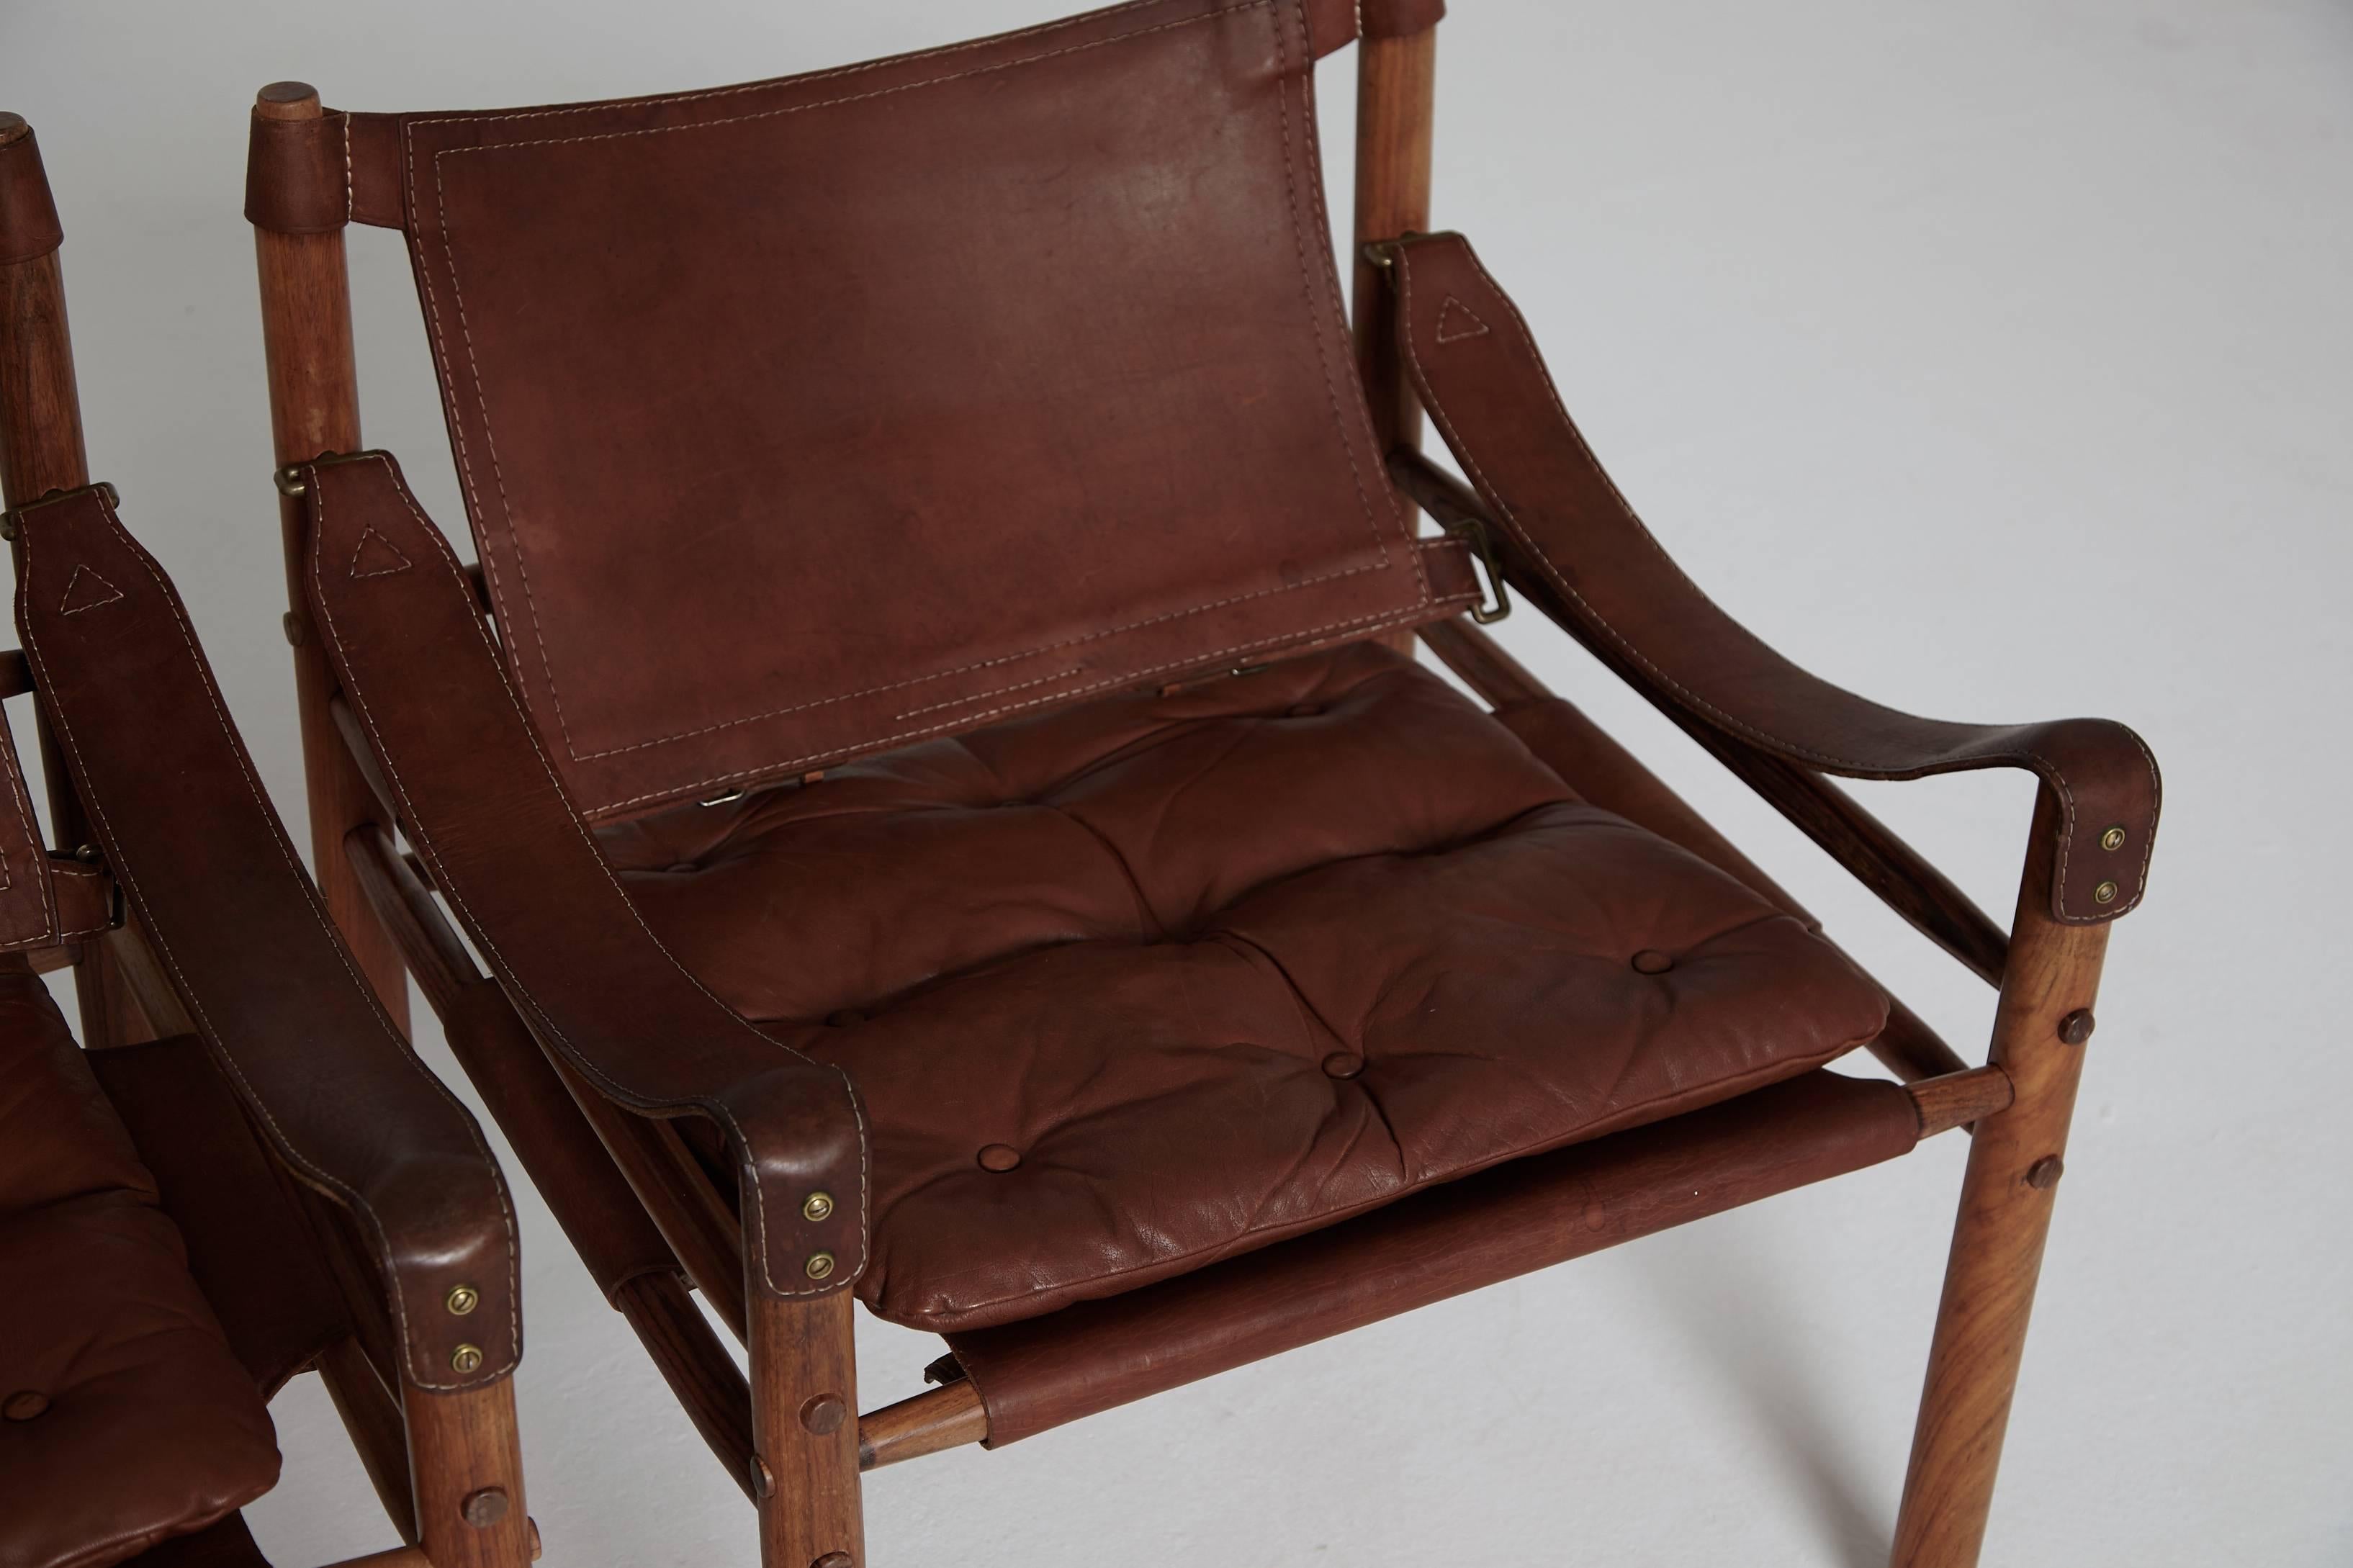 20th Century Arne Norell Rosewood and Brown Leather Safari Sirocco Chairs, Sweden, 1960s